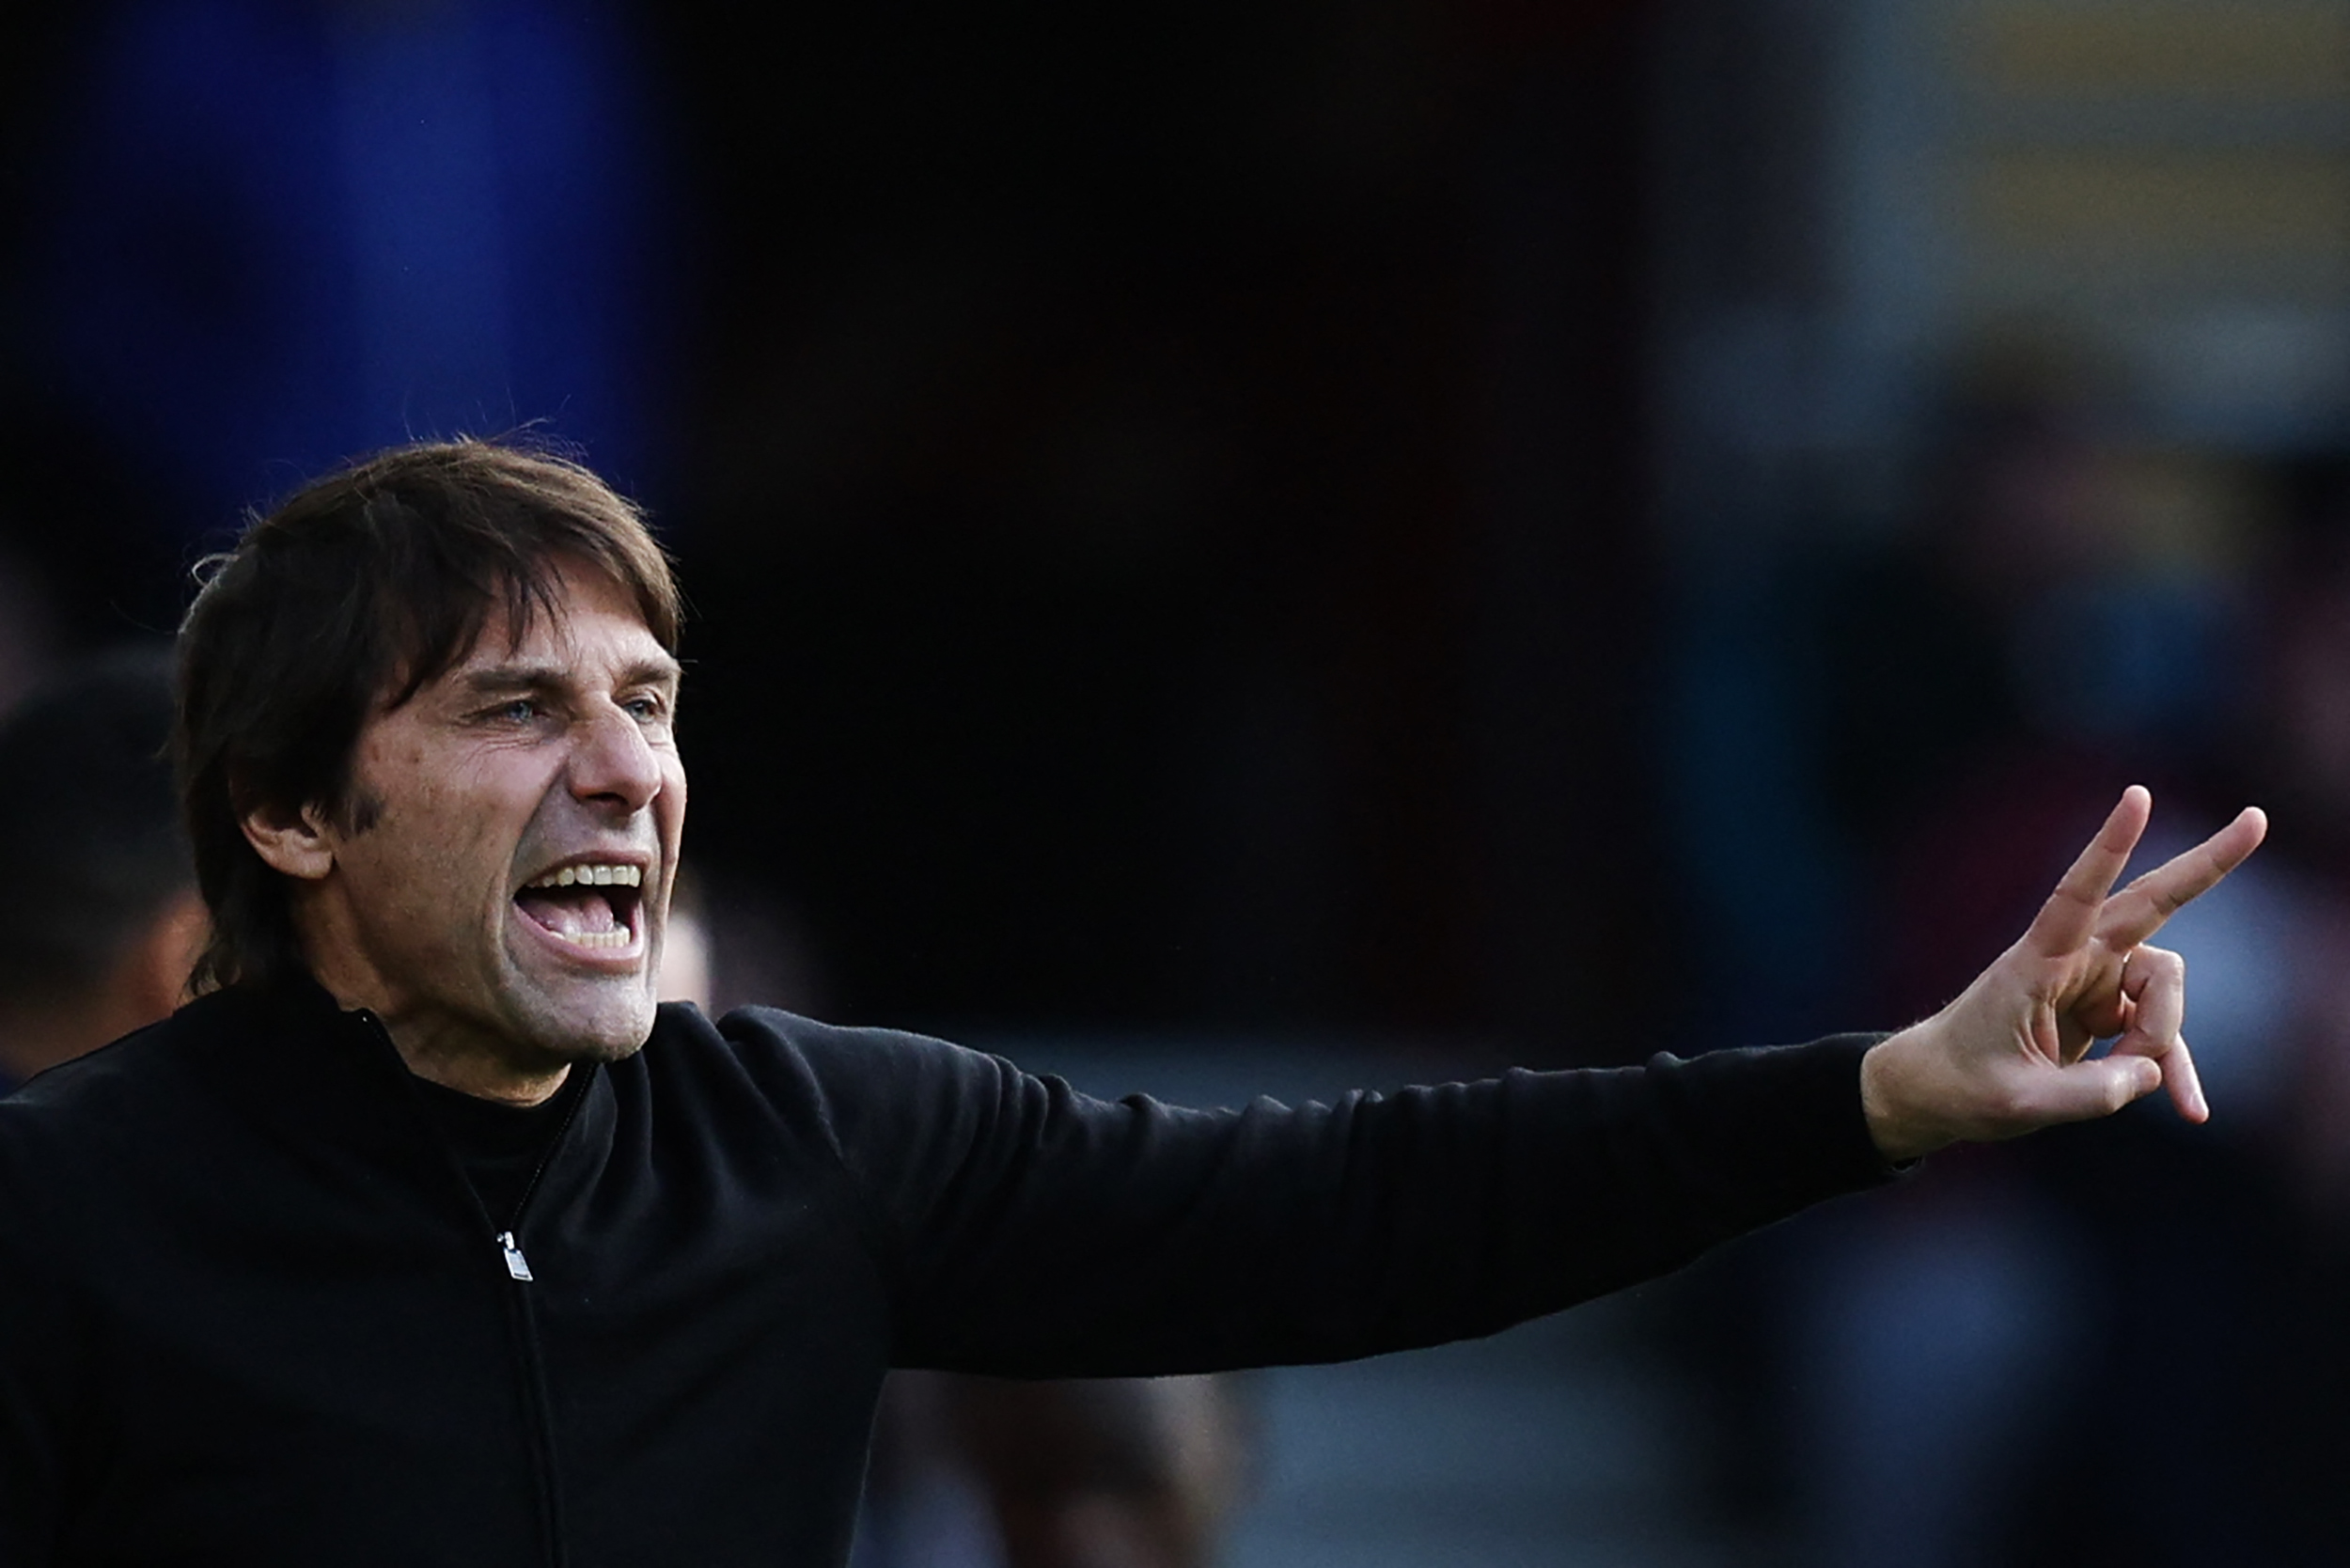 Serie A giants Napoli have reached a "general agreement" for former Chelsea and Spurs manager Antonio Conte